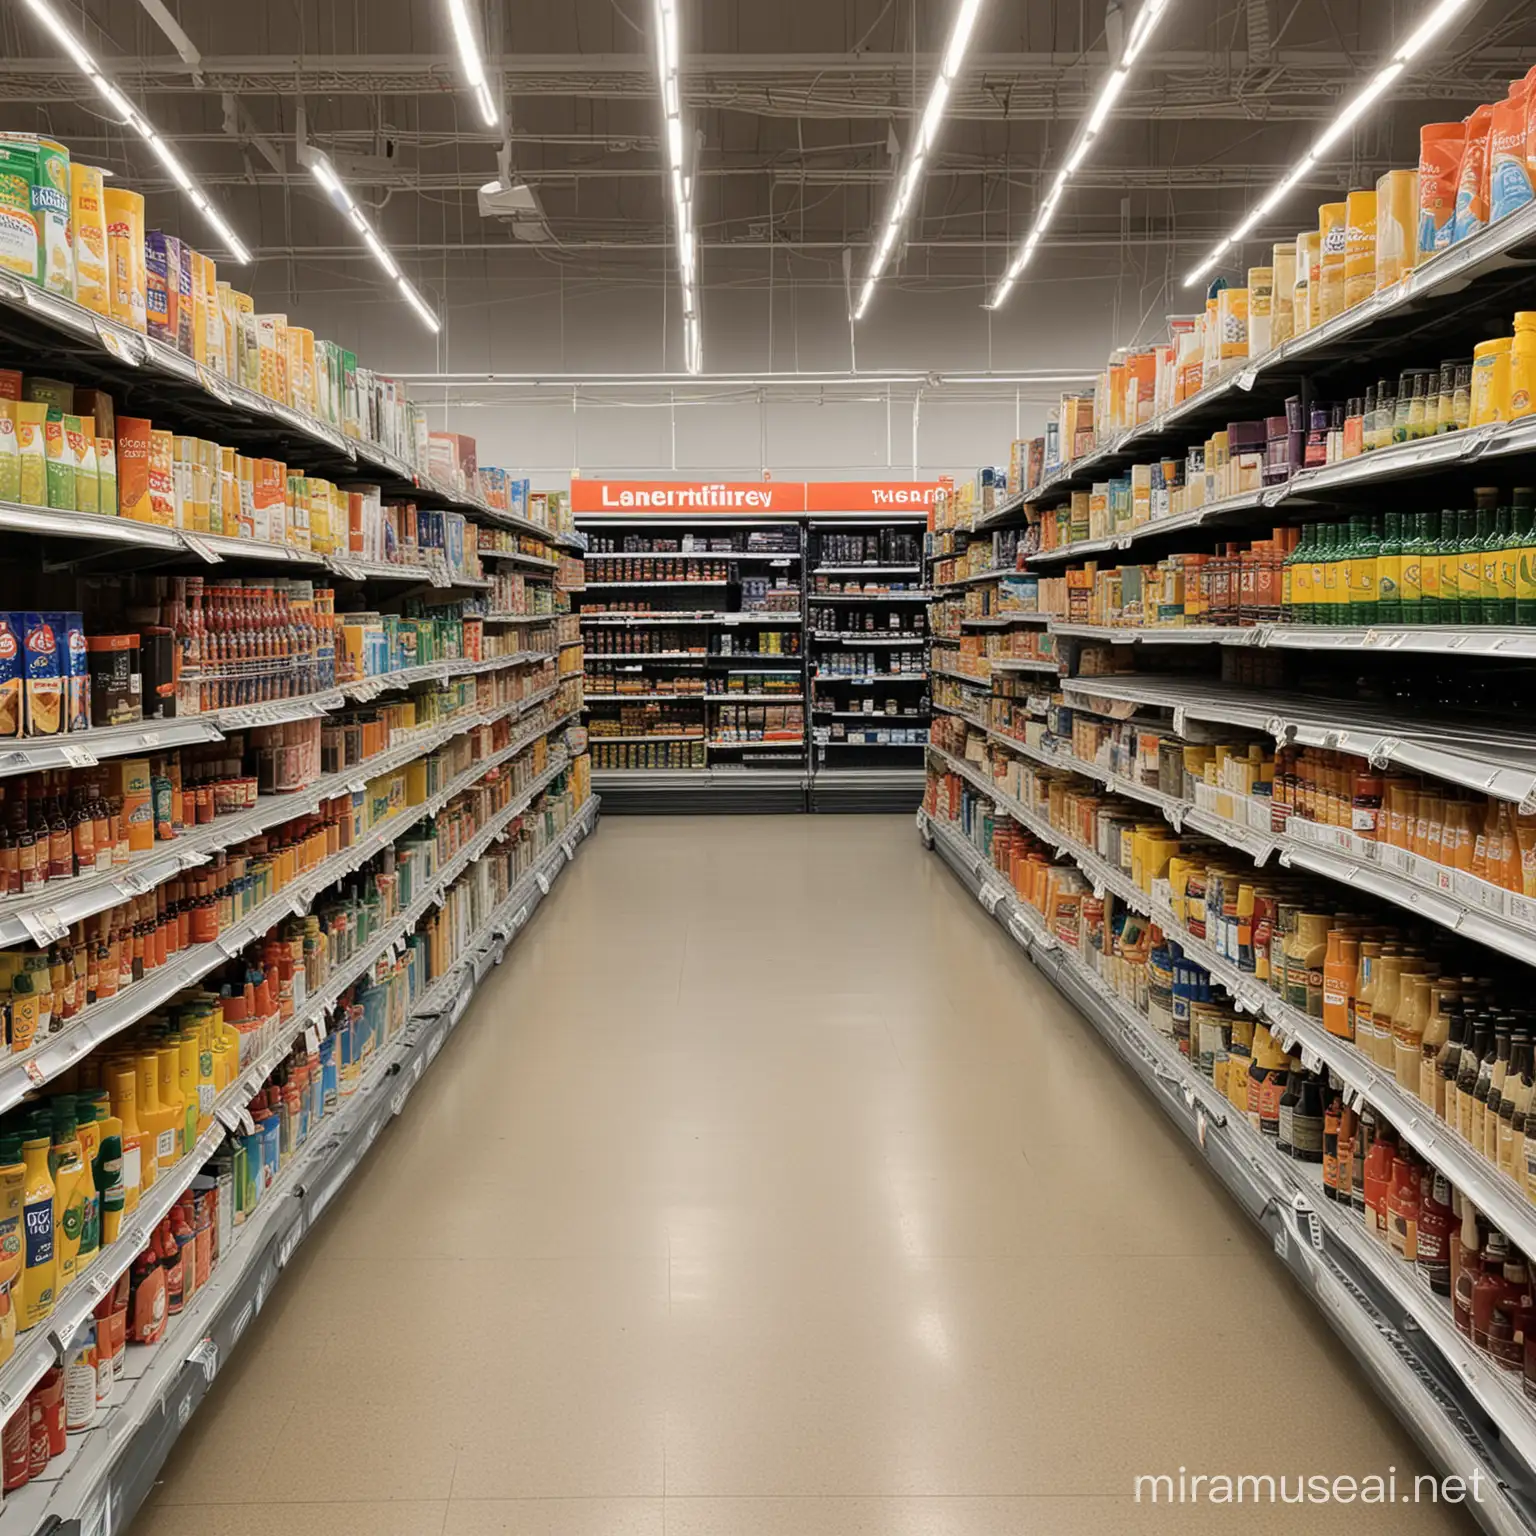 Busy Supermarket Aisle with Colorful Products on Shelves